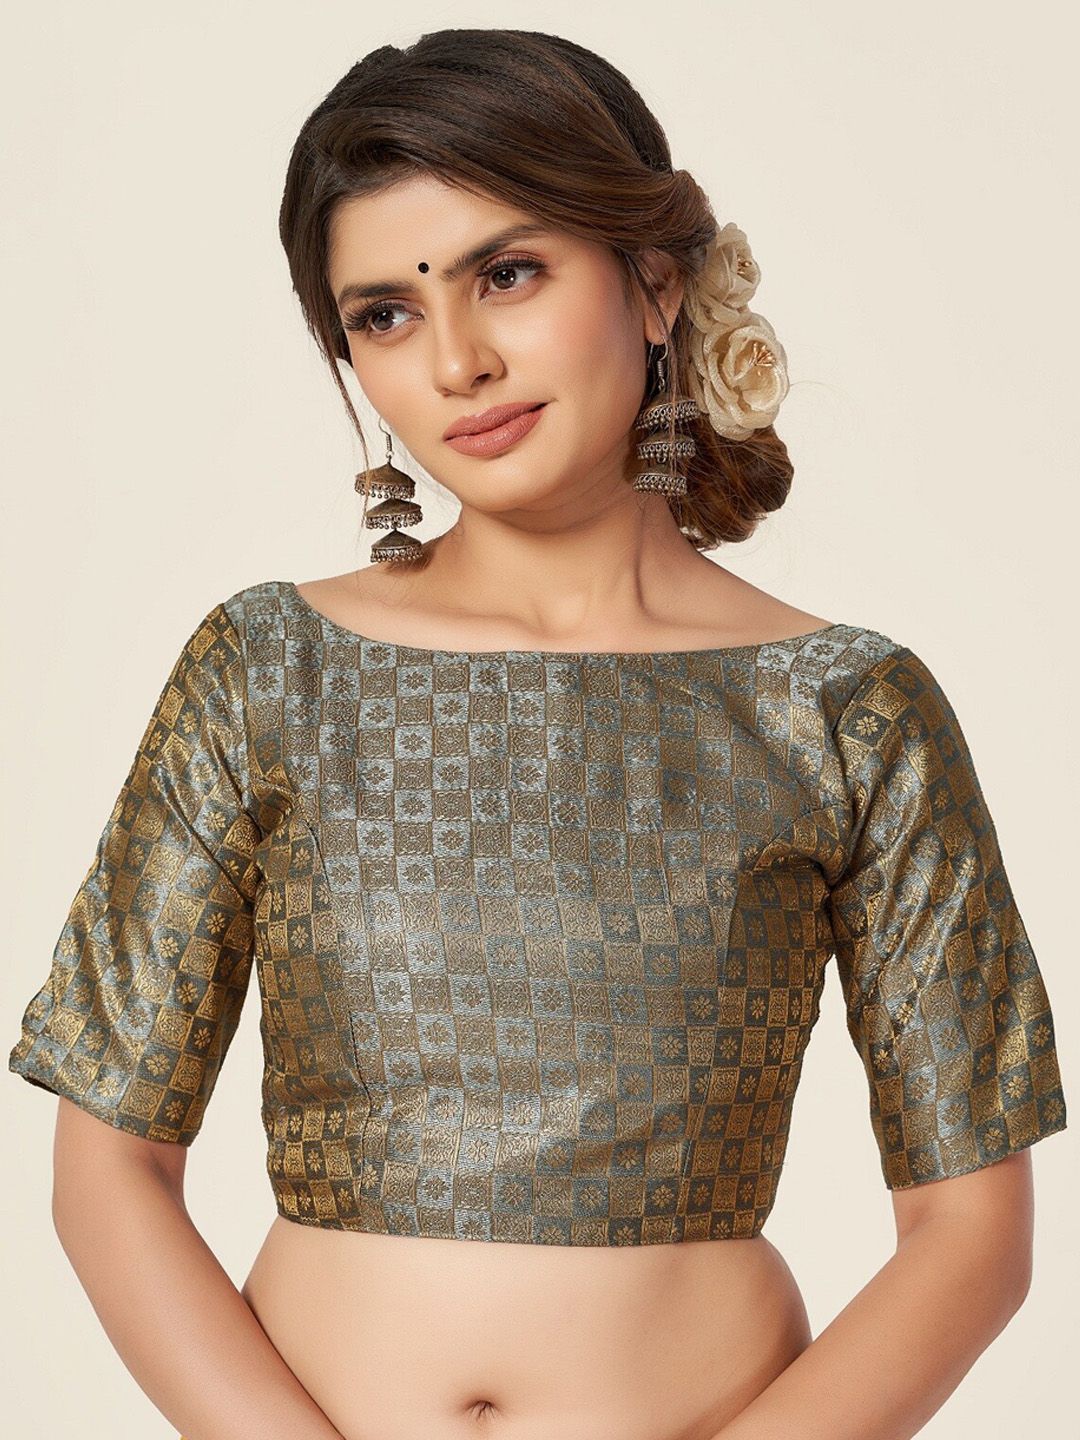 HIMRISE Women Grey Woven Design Boat Neck Saree Blouse Price in India